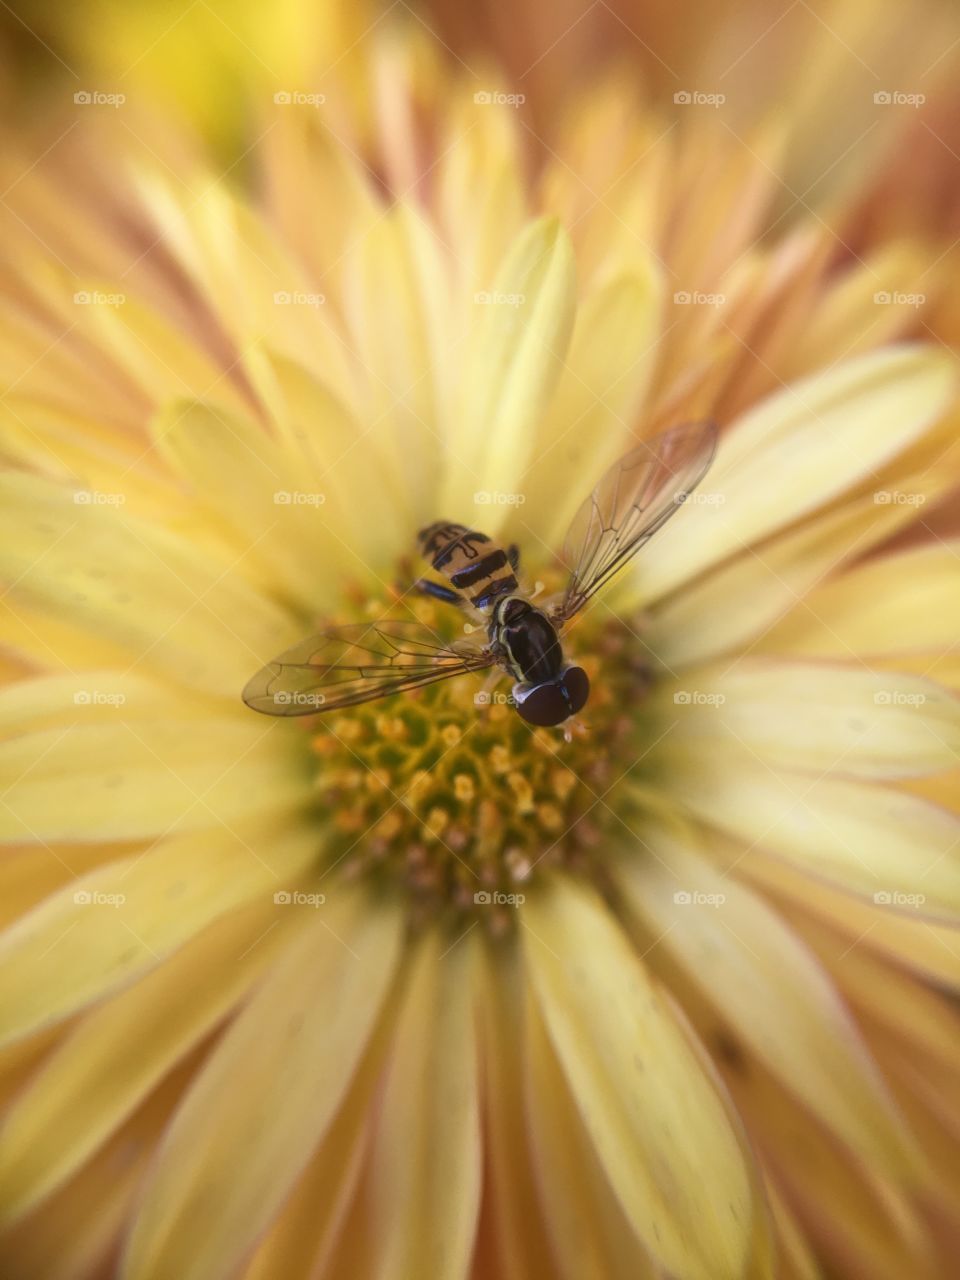 Insect on mum